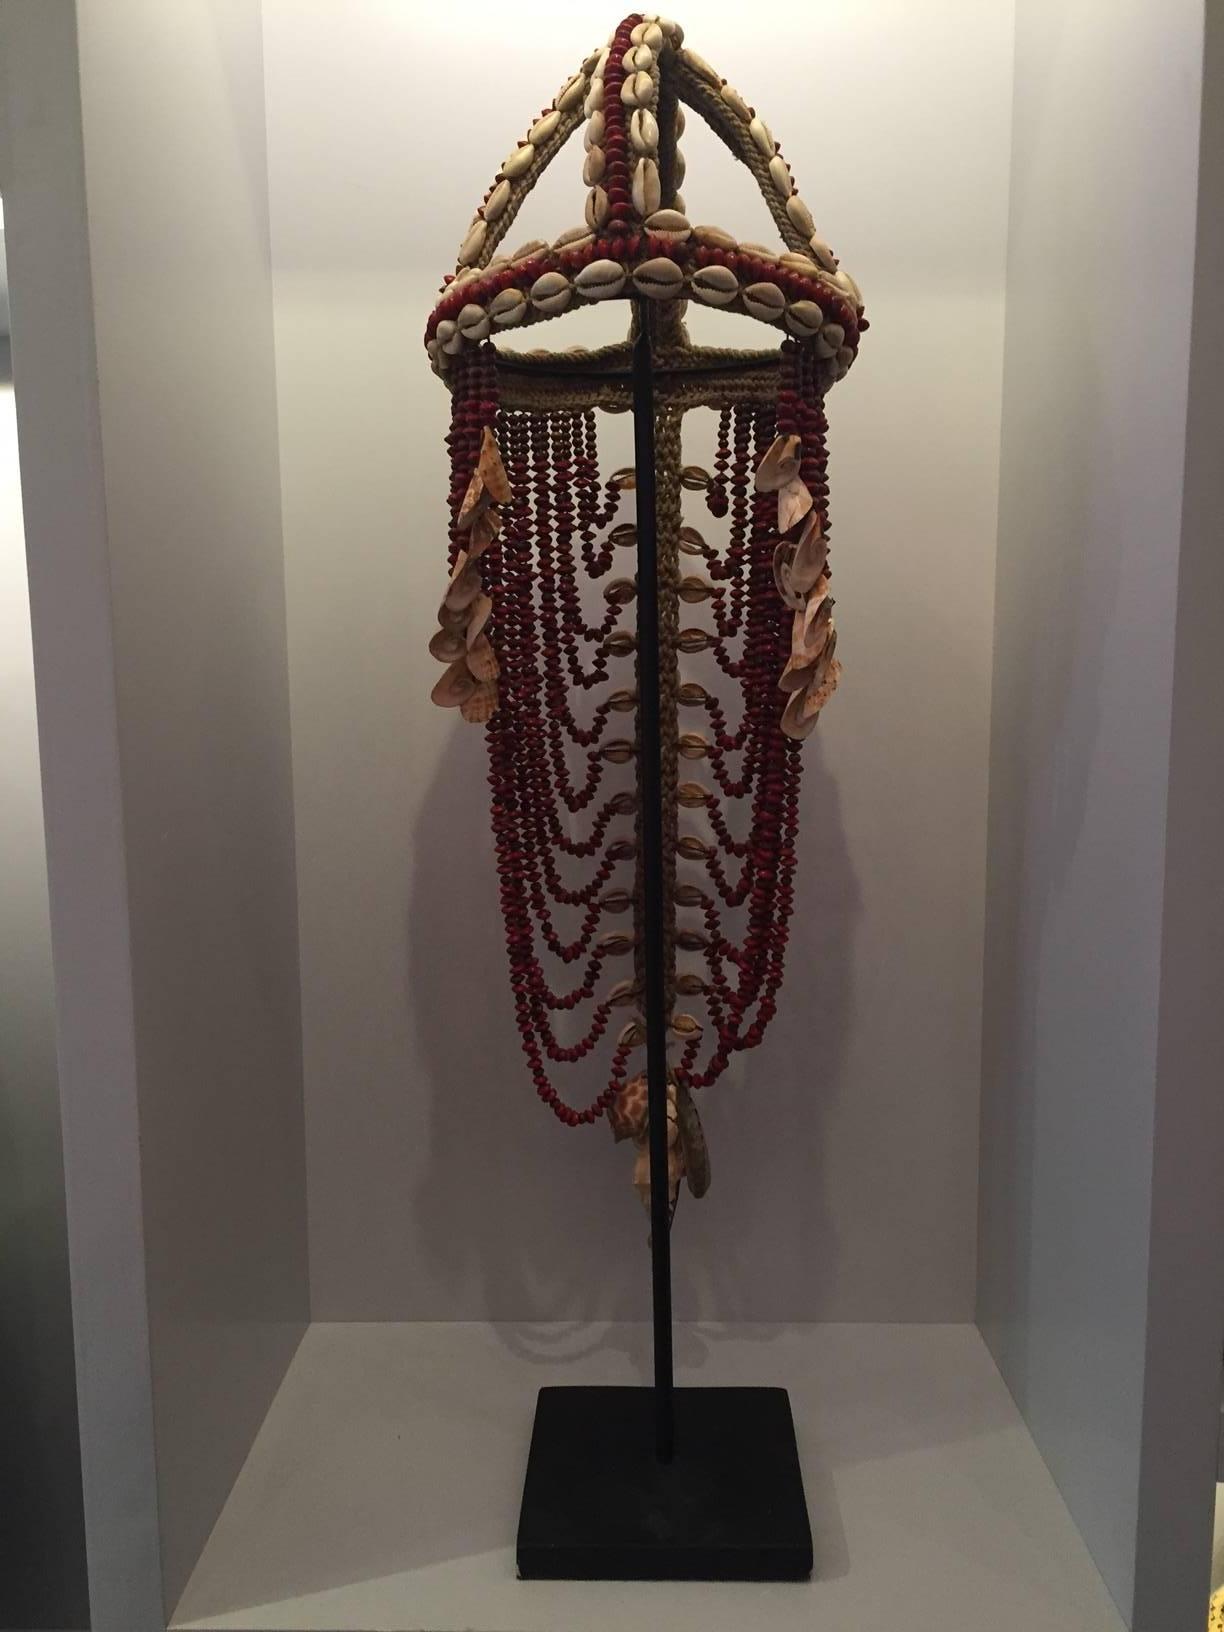 Headdress from Papua New Guinea made from cowrie shells and red seeds applied to traditional macramé fiber. Traditionally this type of ceremonial headdress also served as a form of currency and was often included in wedding dowries. The monetary